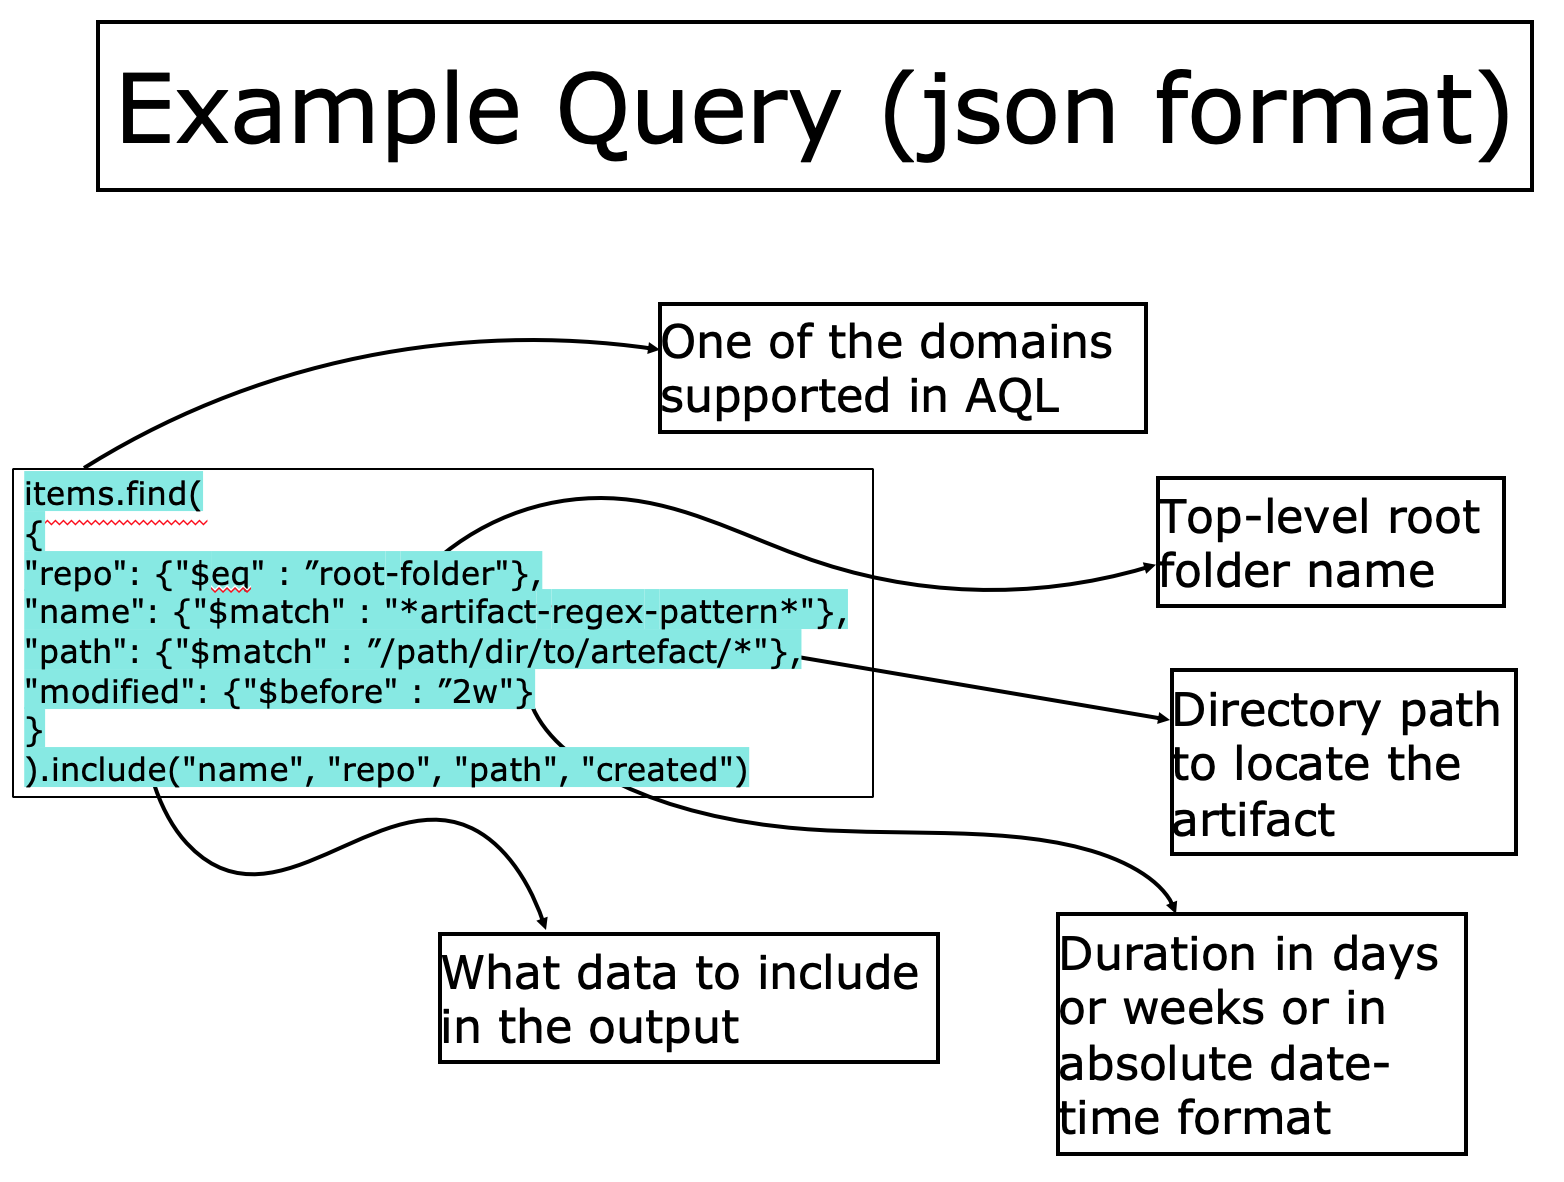 Example query